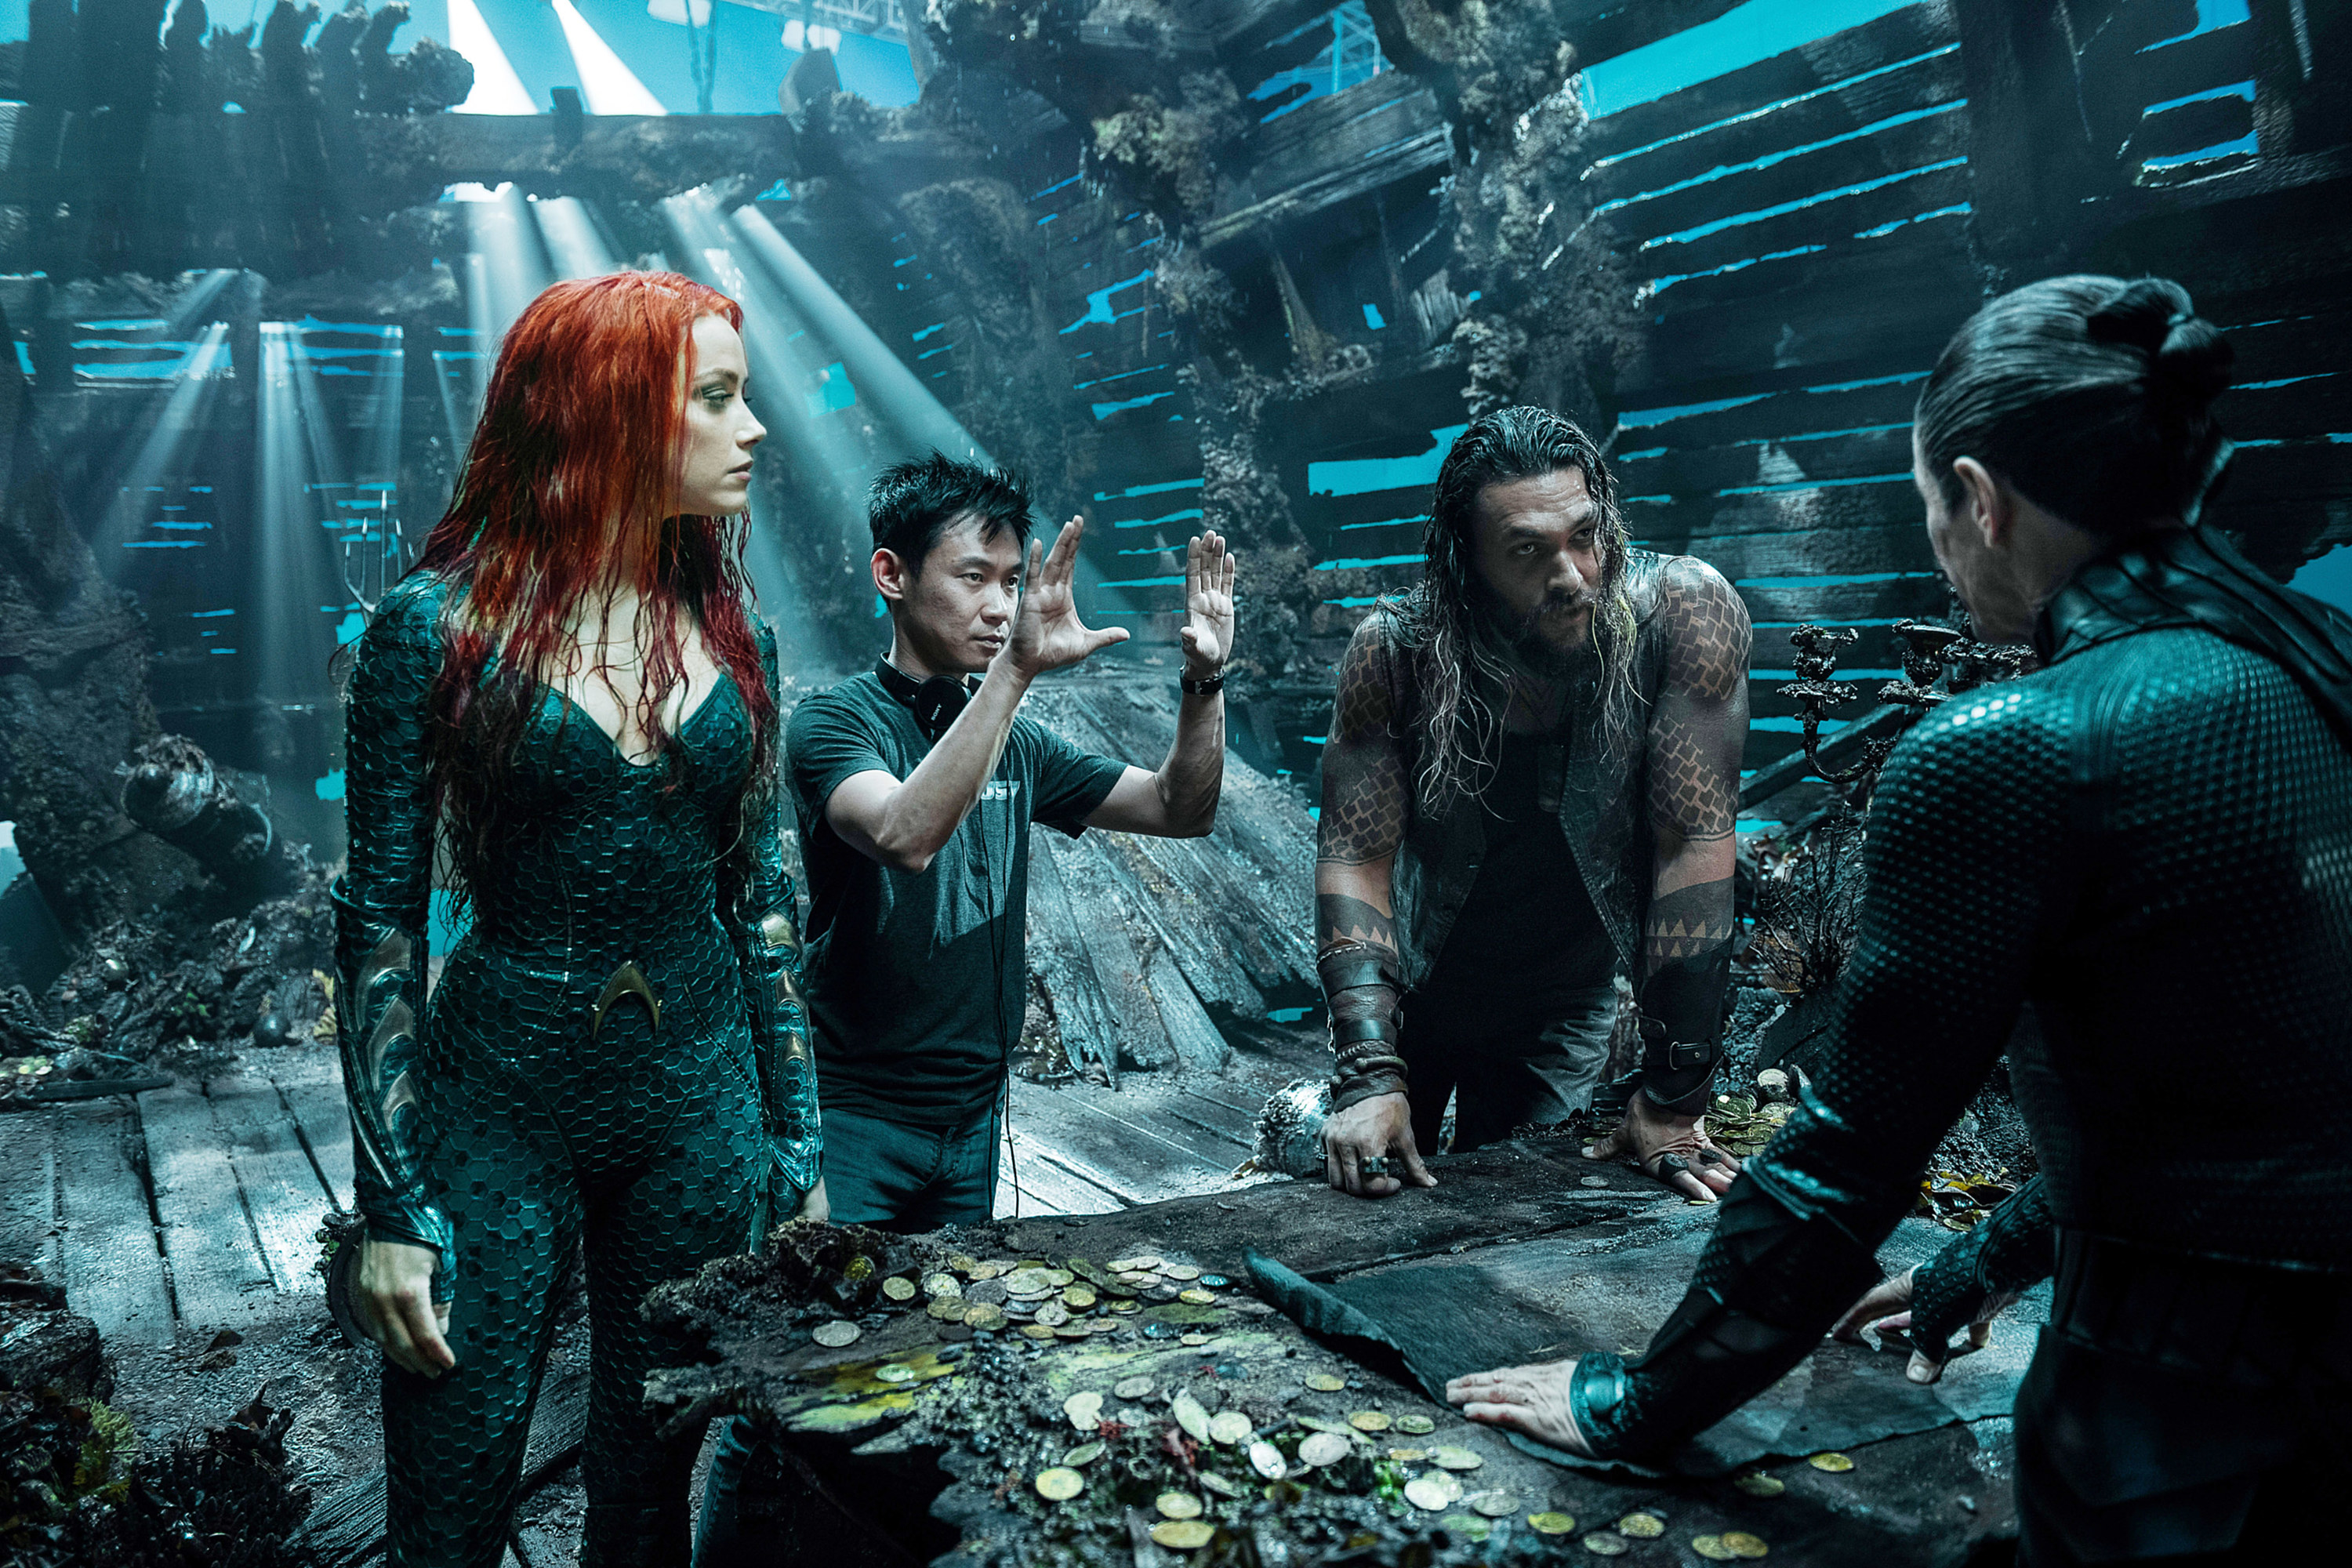 A scene from Aquaman with Heard and Momoa